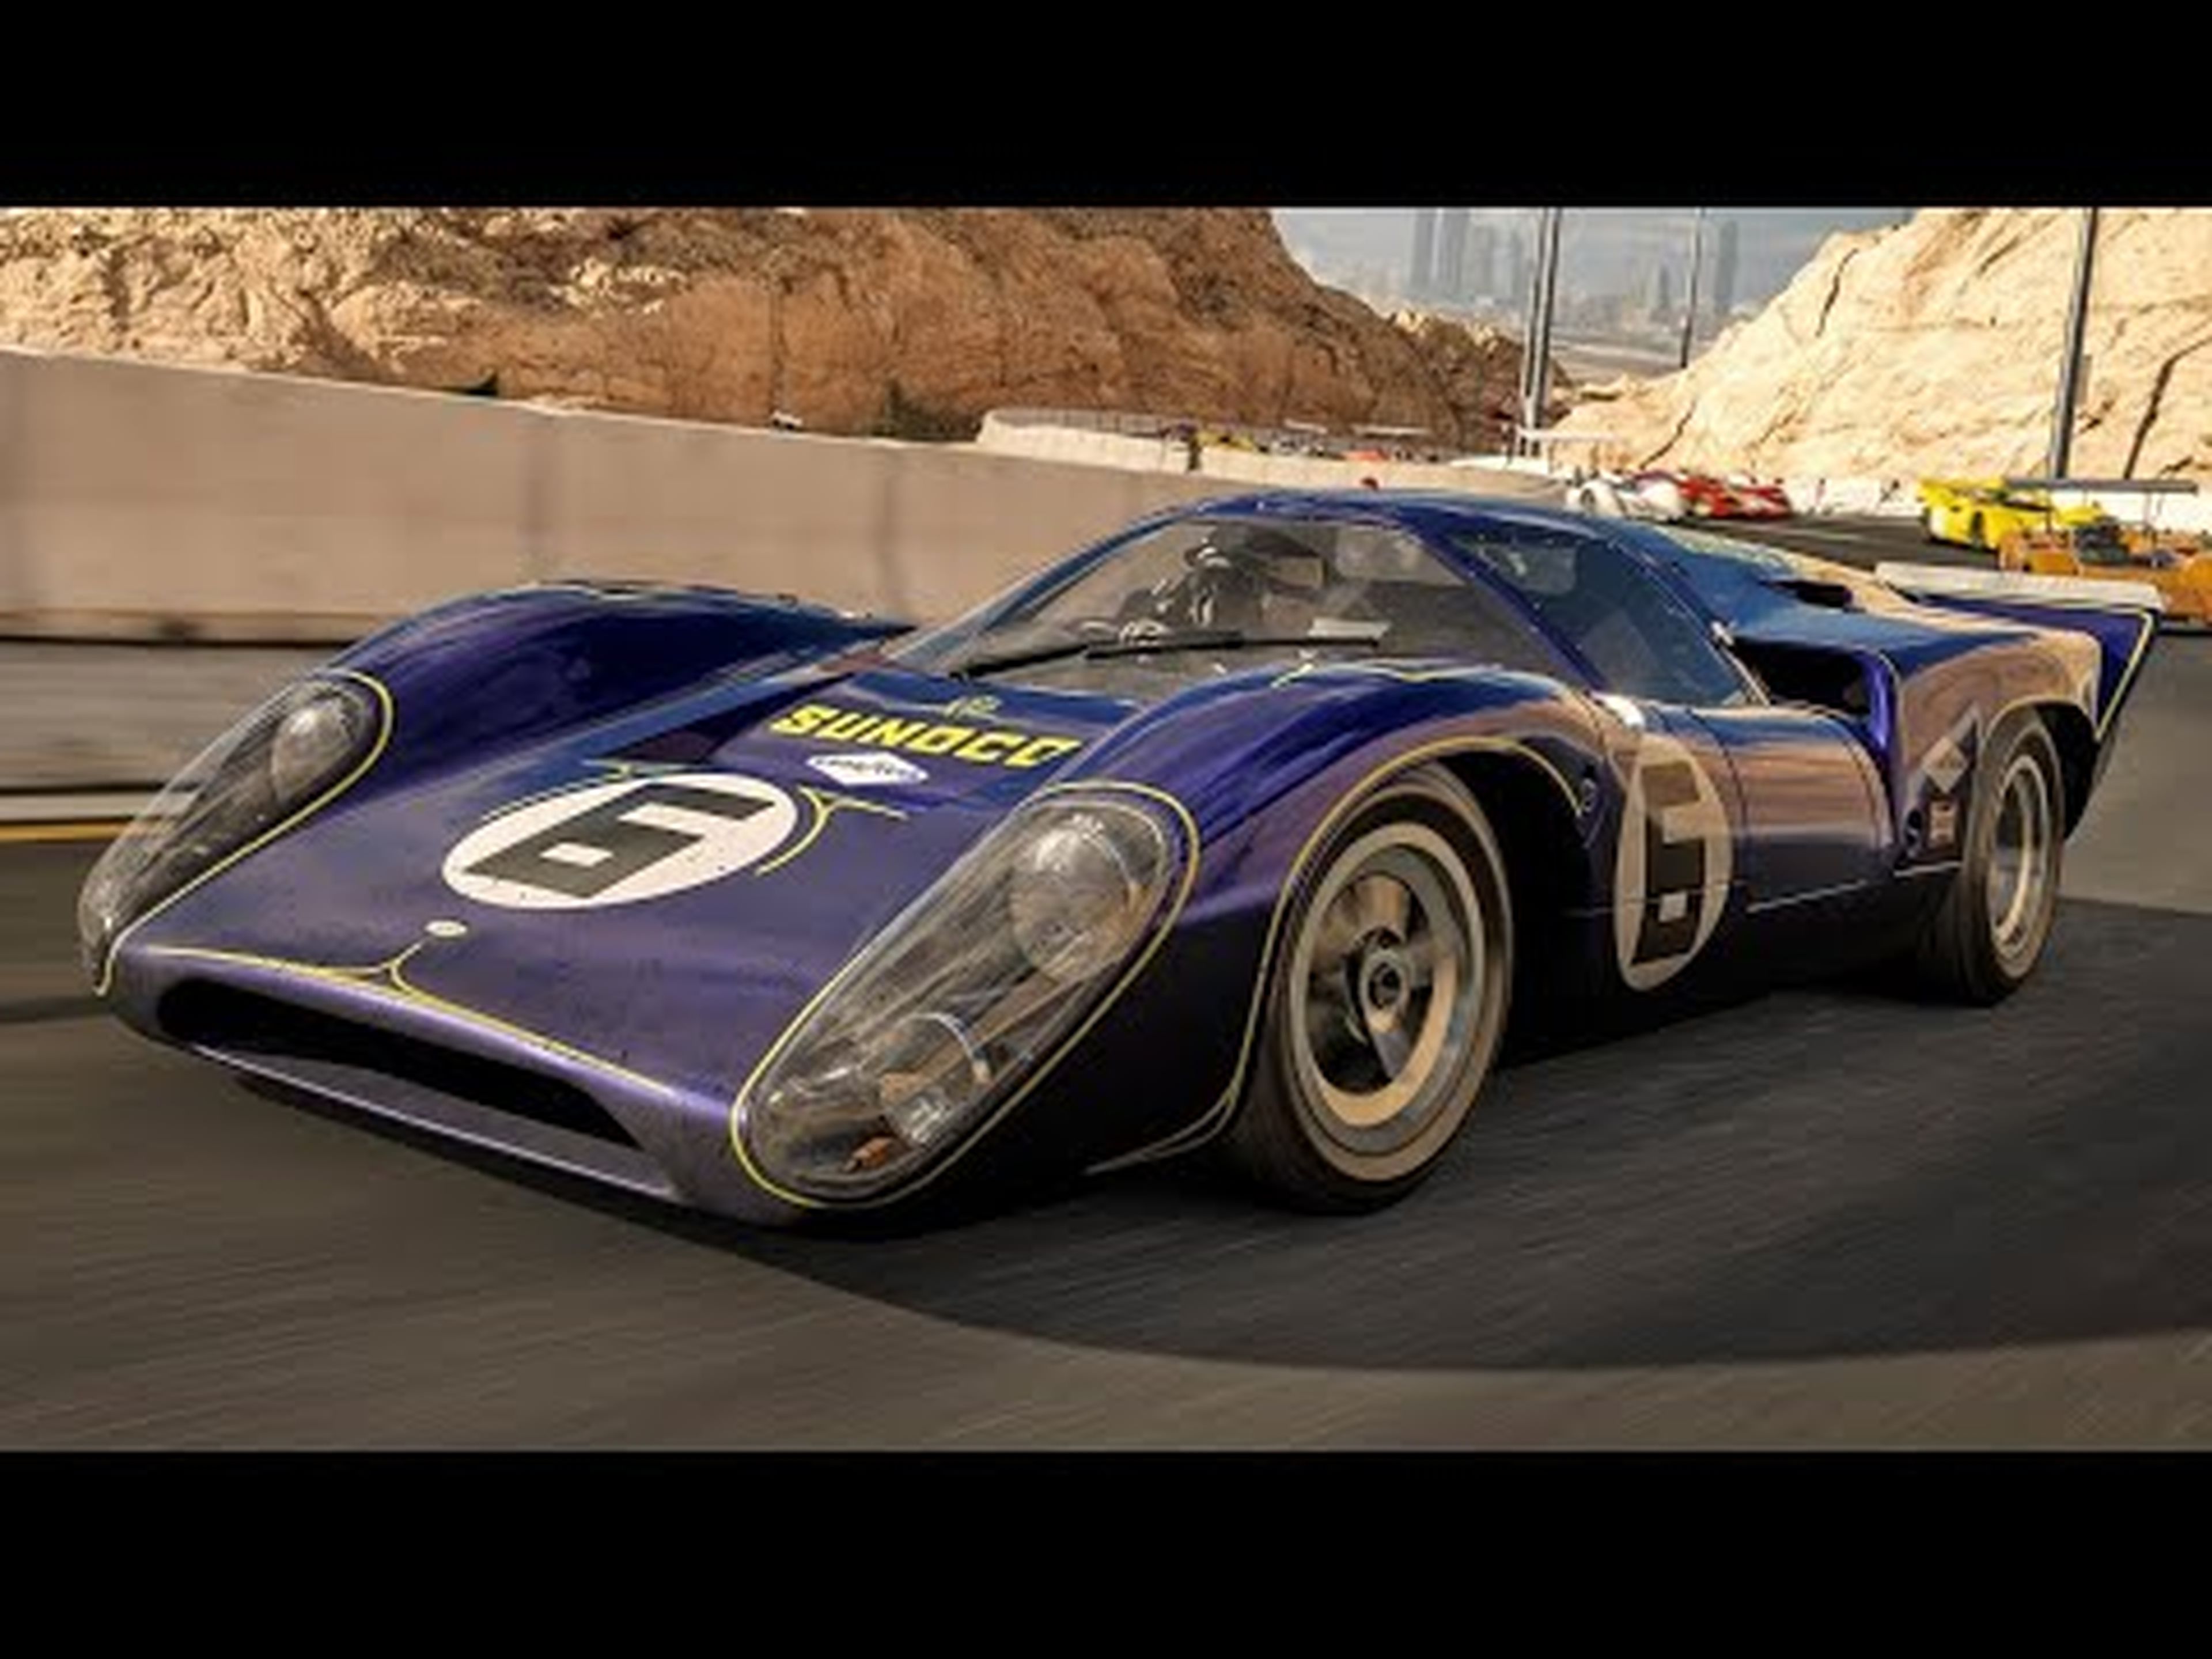 How Forza Motorsport 7 Stays Ahead With Xbox One X - IGN Live: Gamescom 2017